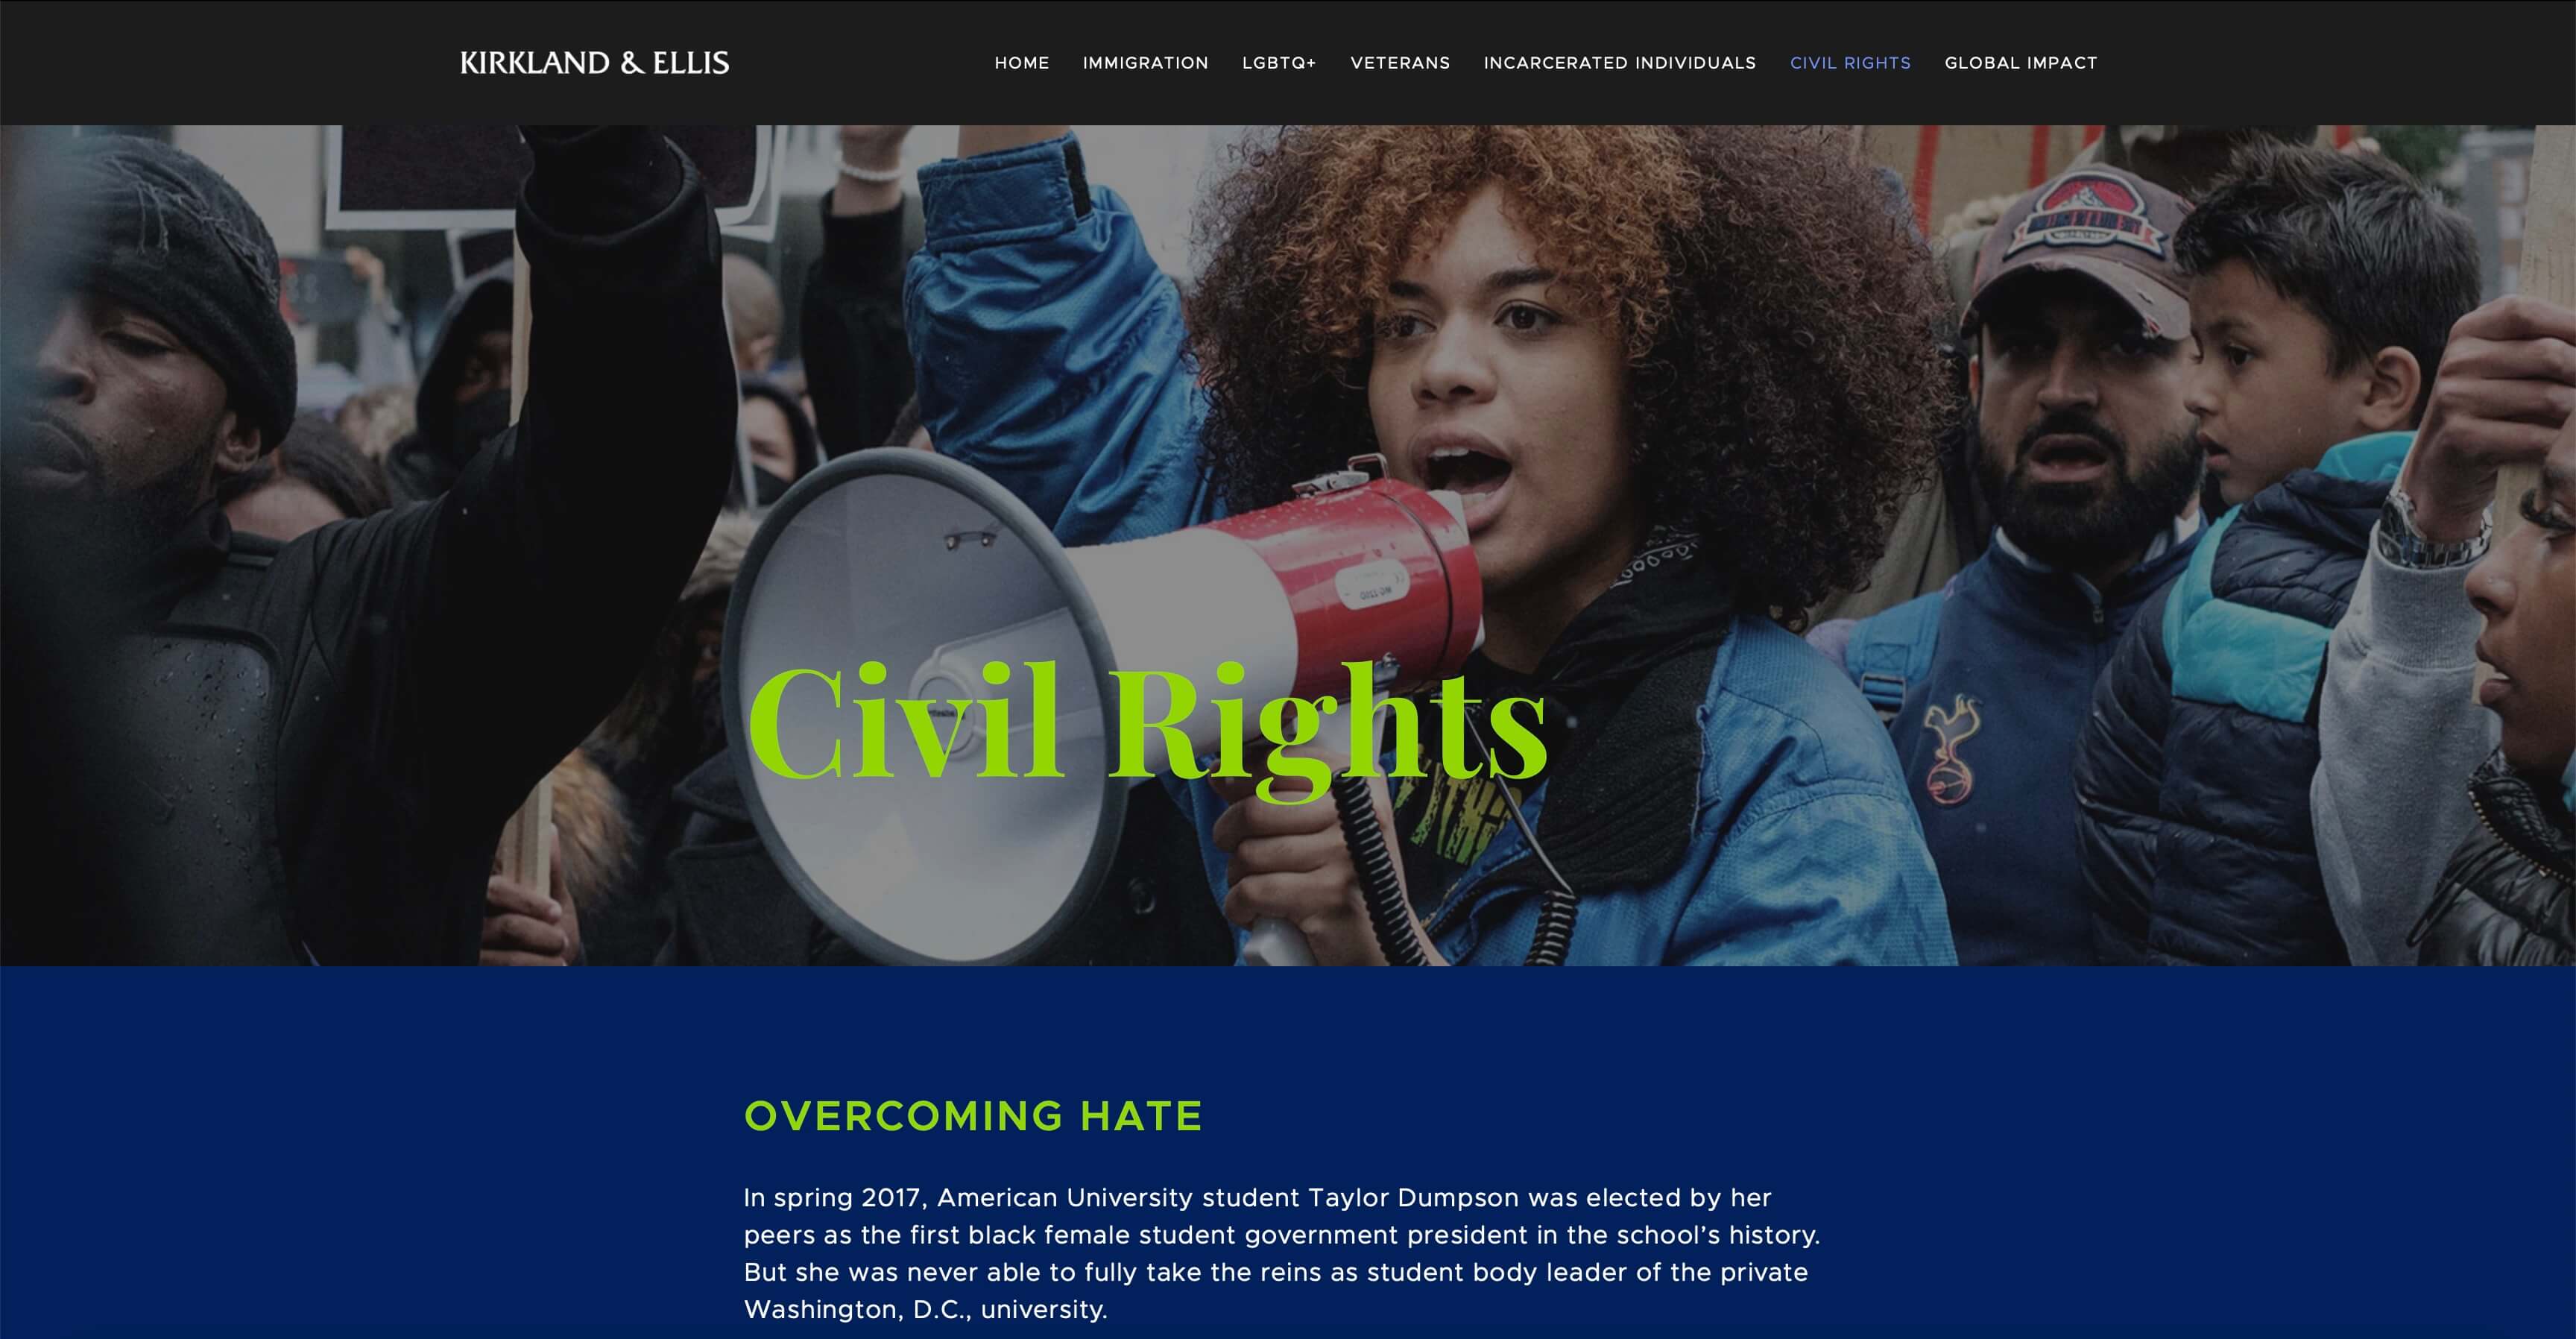 Civil Rights page